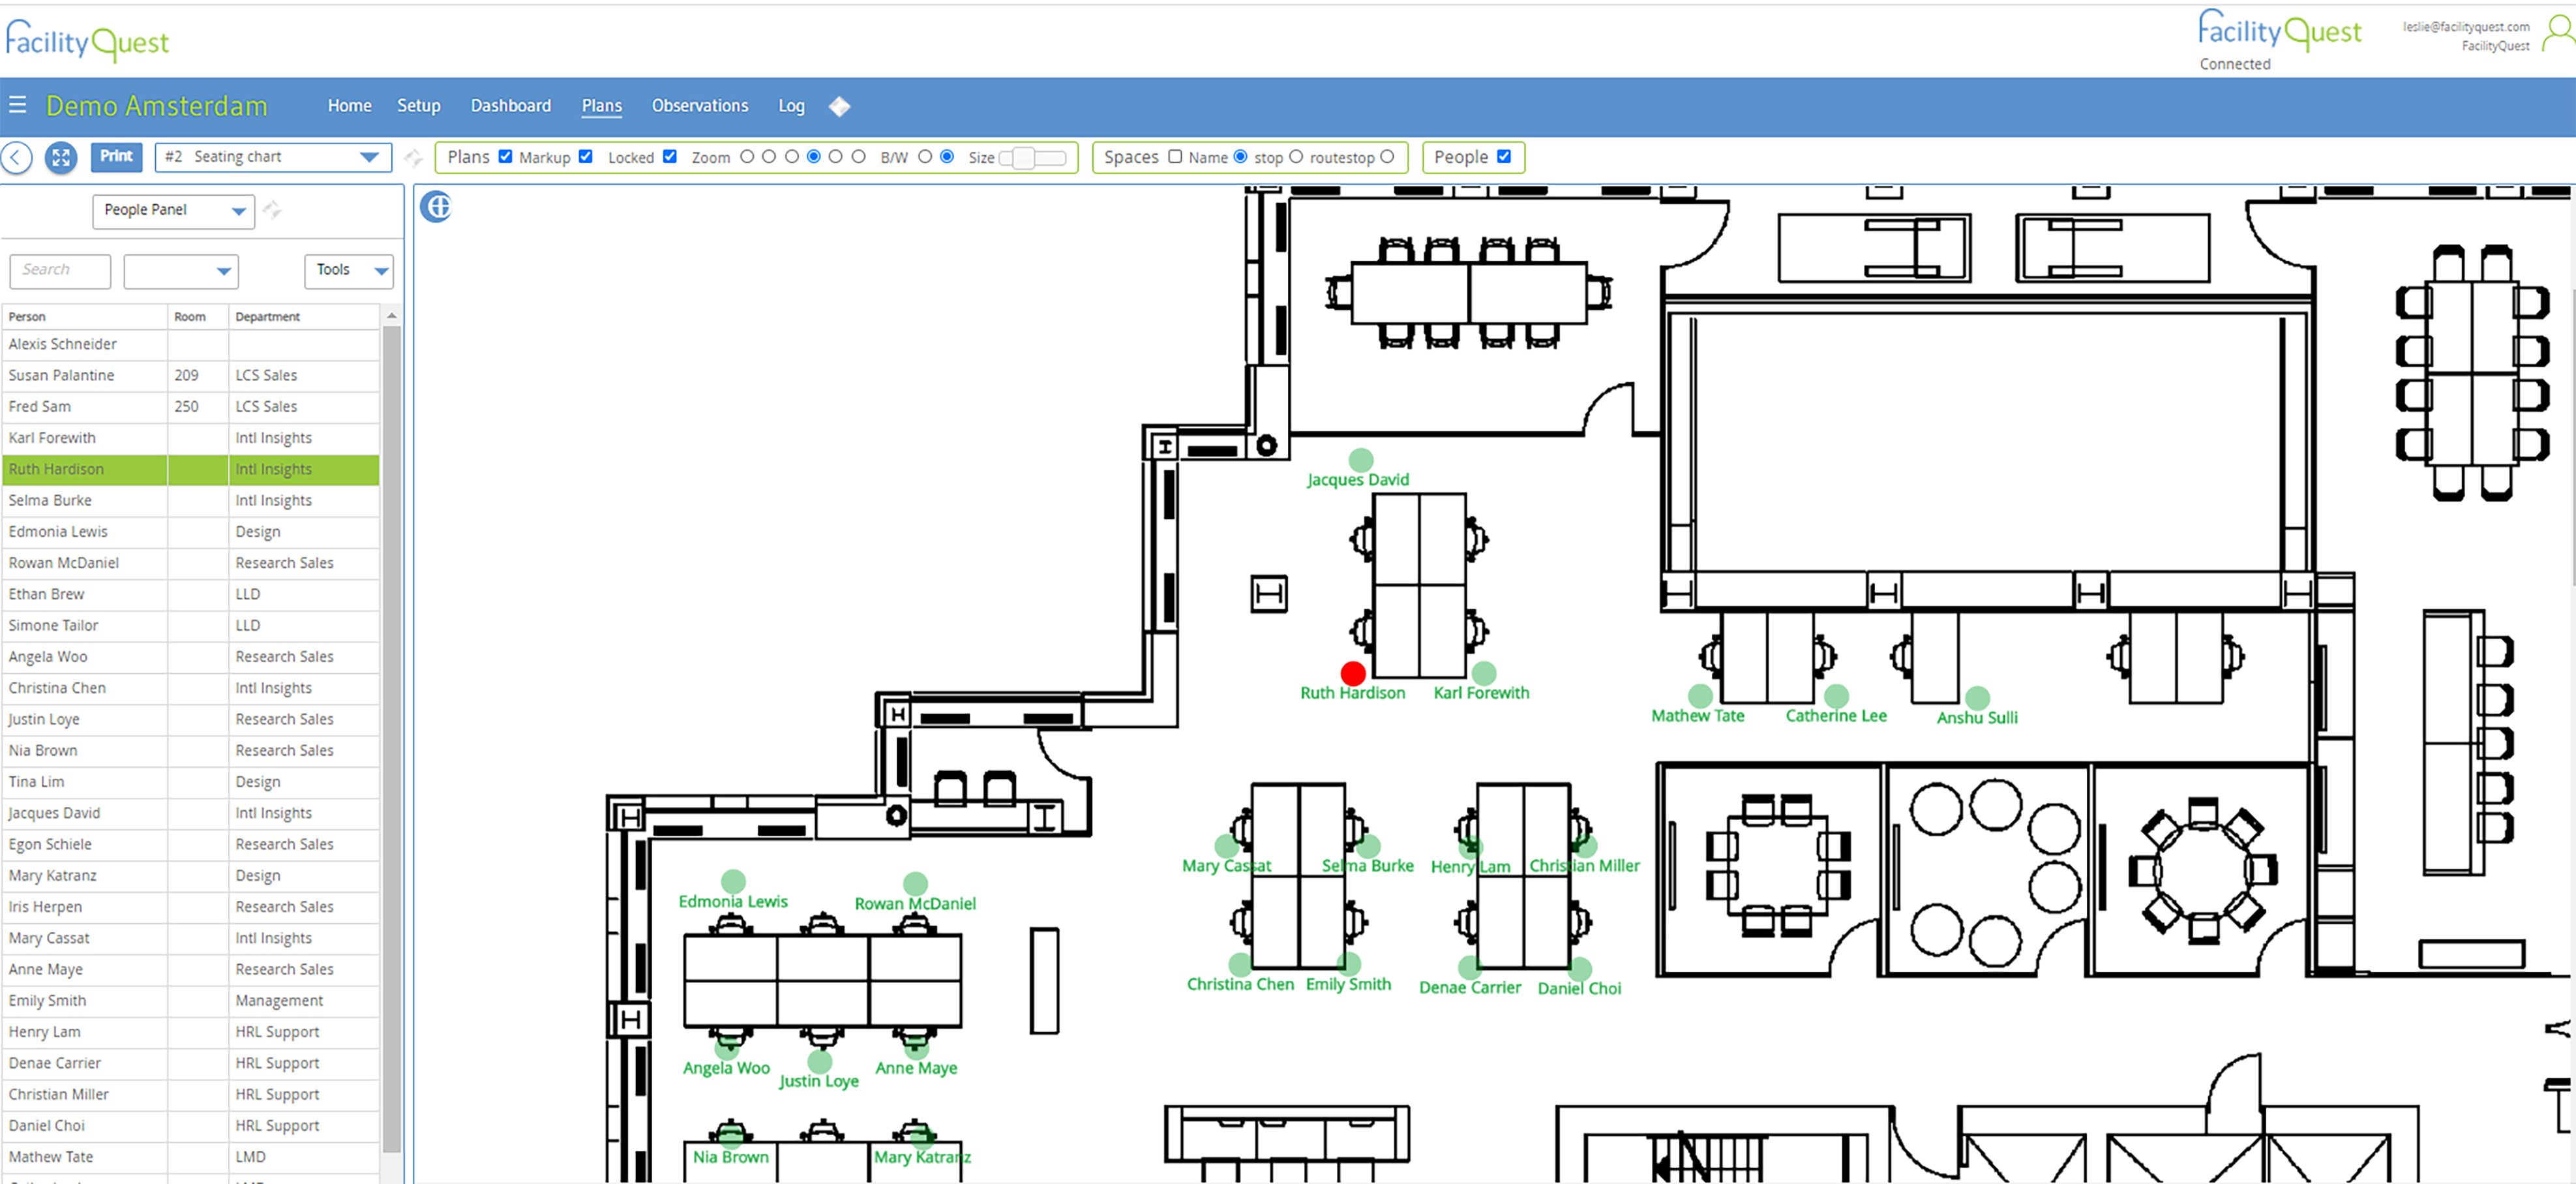 Manage and find people on floor plans, assigning them to spaces and assigning assets to them.